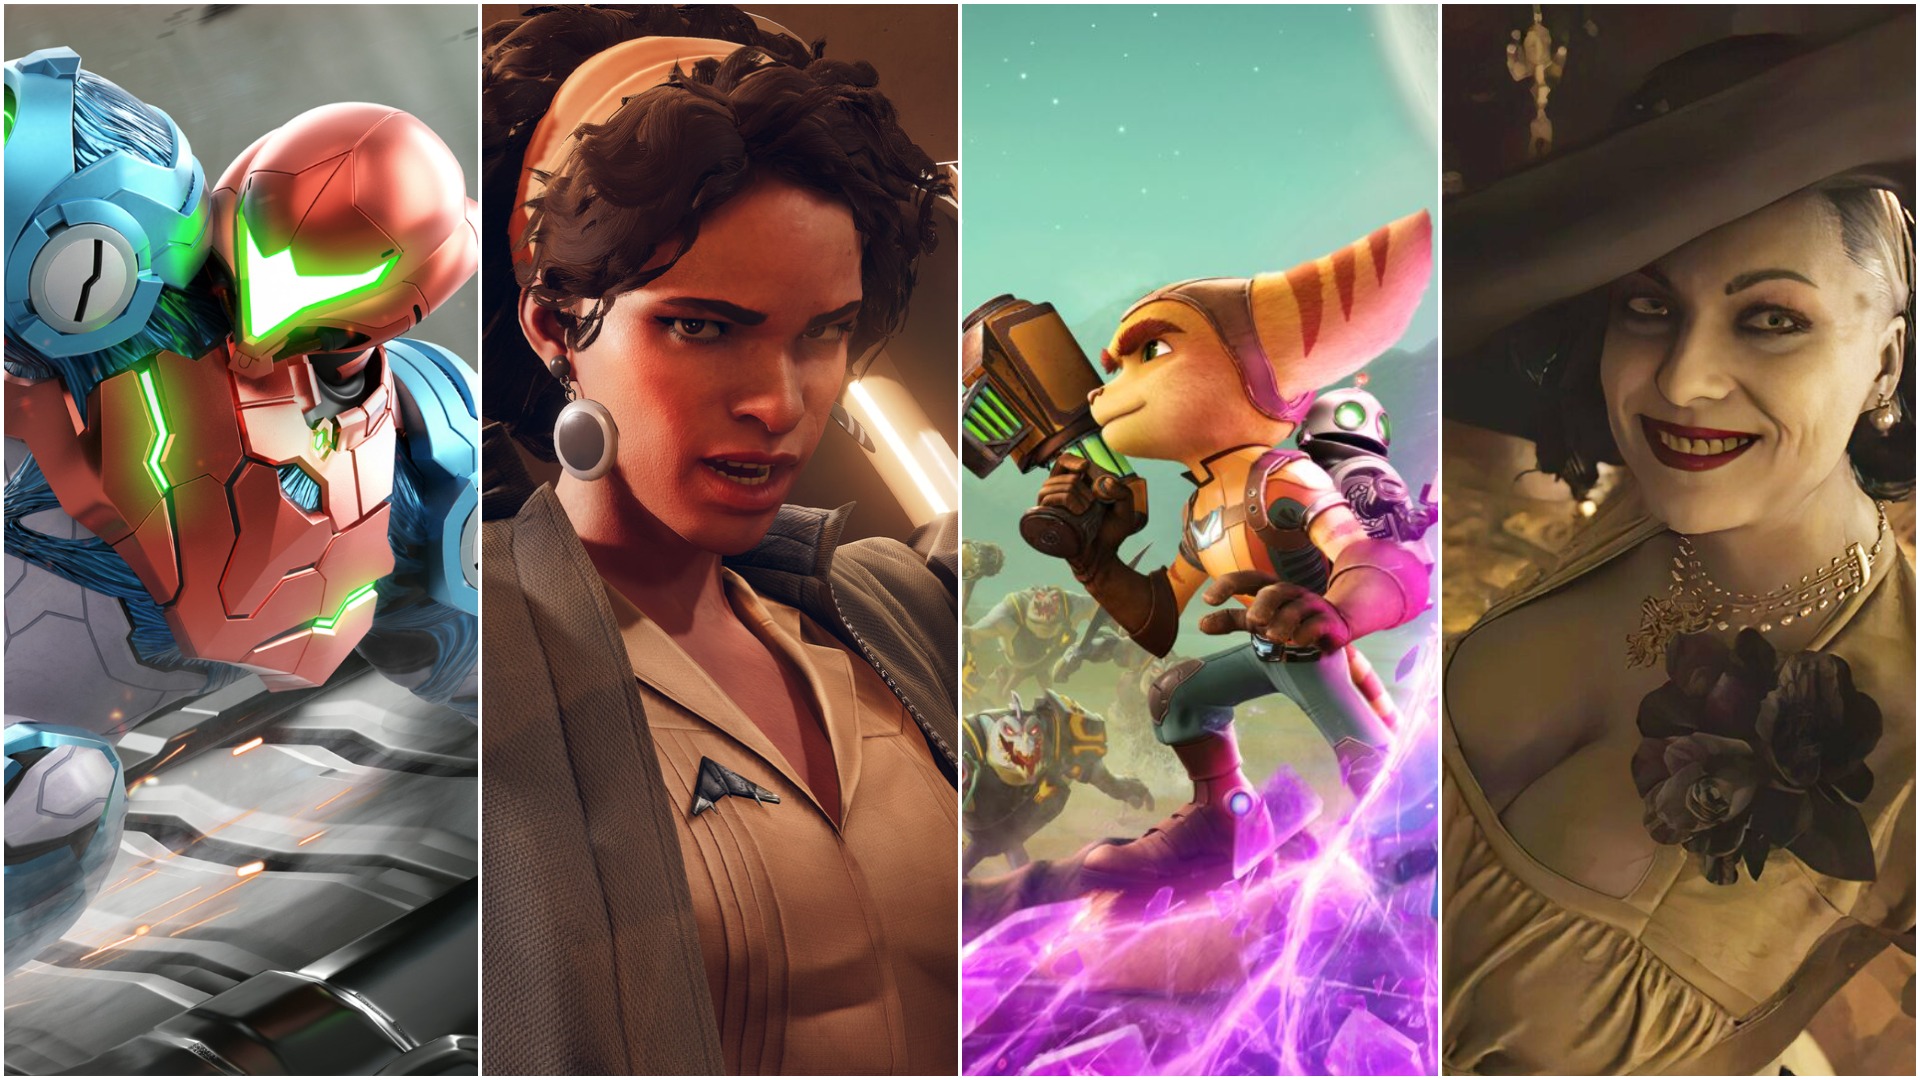 The Game Awards 2021 Nominations: Biggest Snubs and Surprises